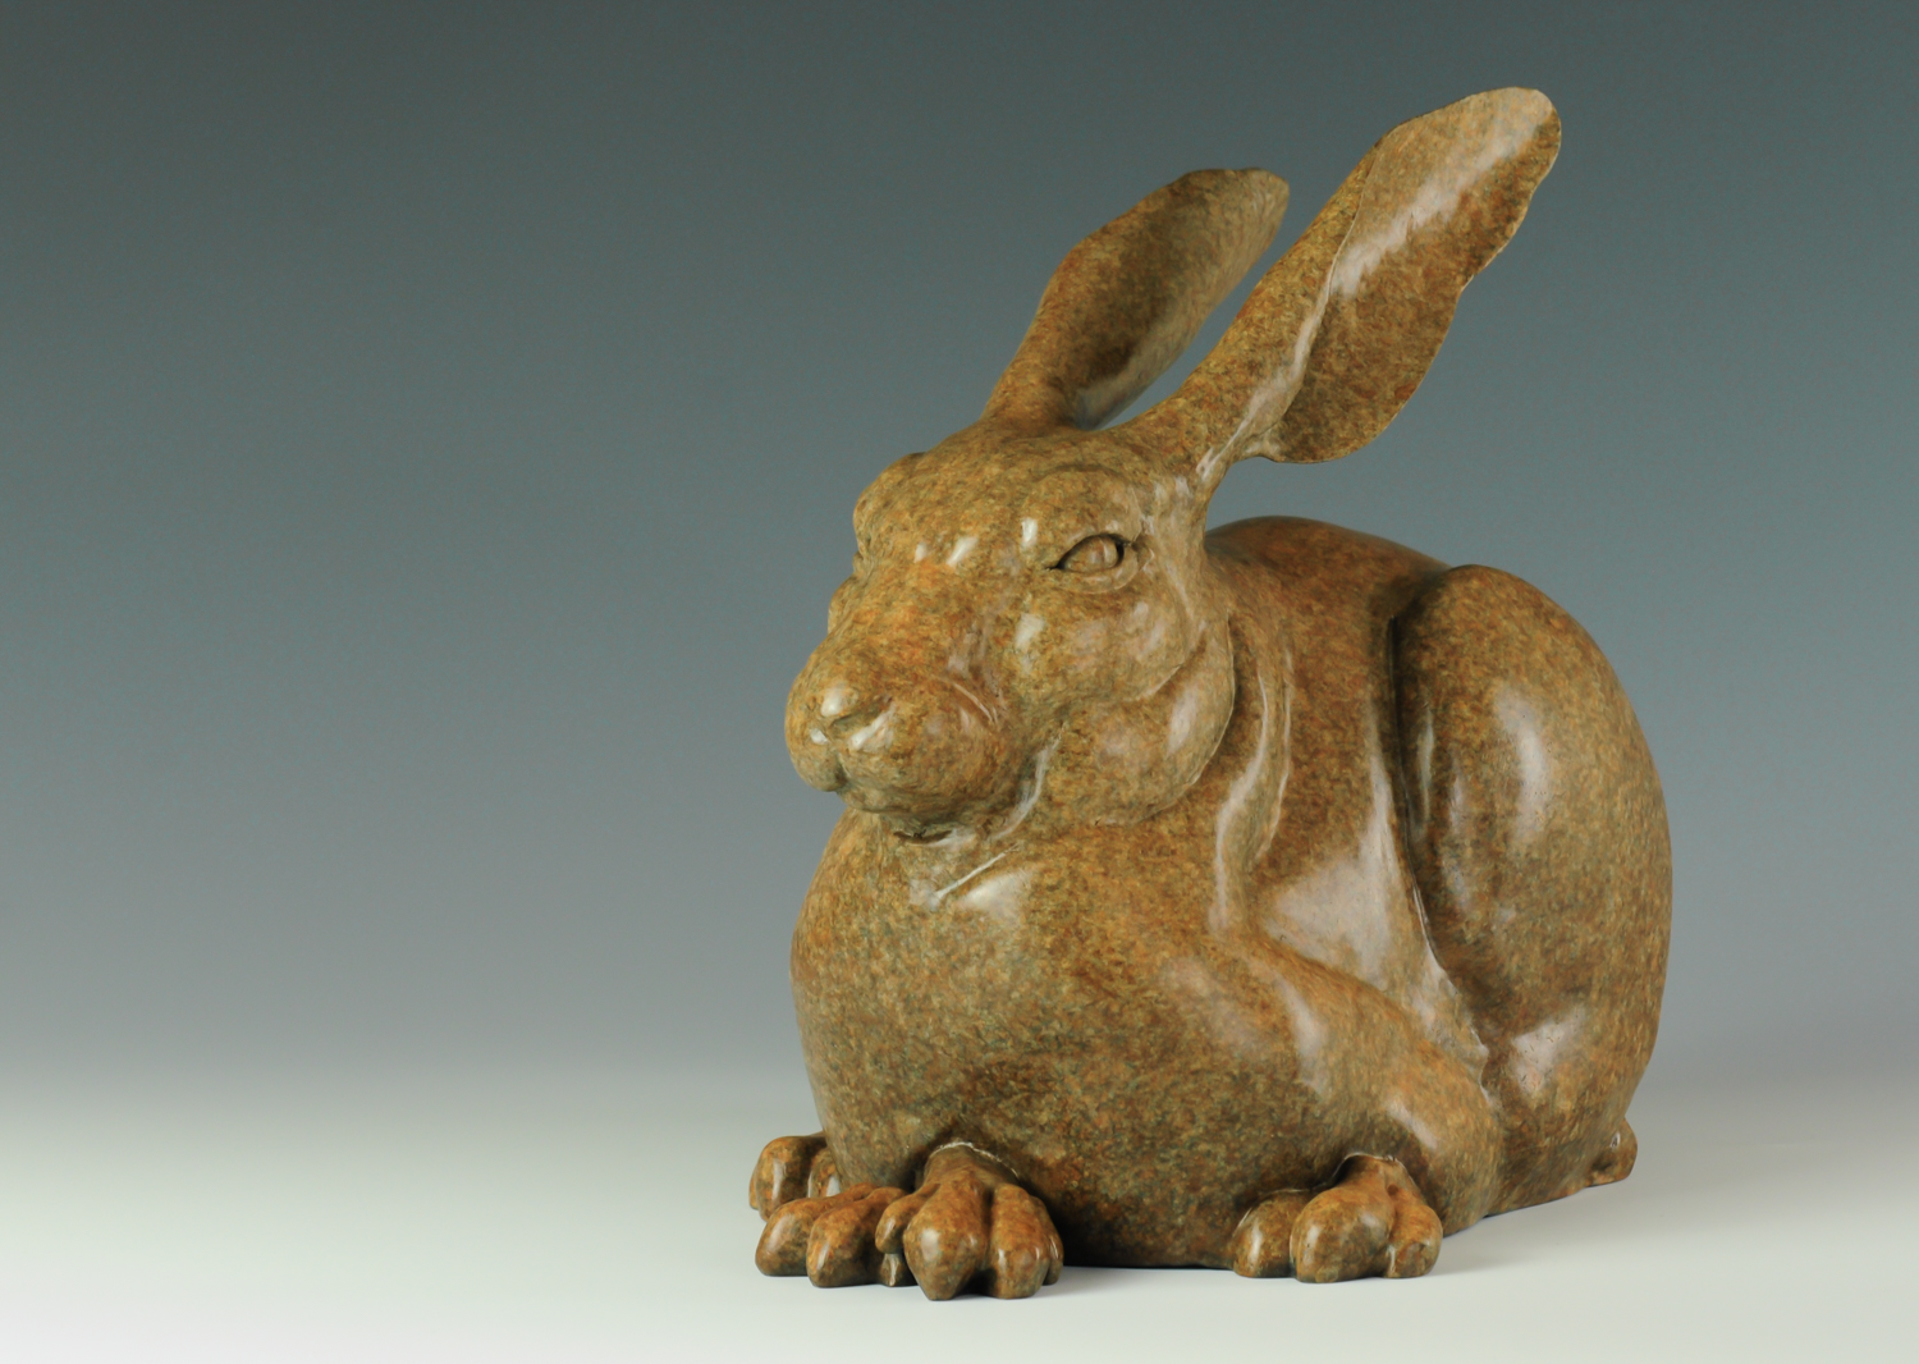 A Fine Art Sculpture In Bronze By Jeremy Bradshaw Featuring A Resting Rabbit, Available At Gallery Wild